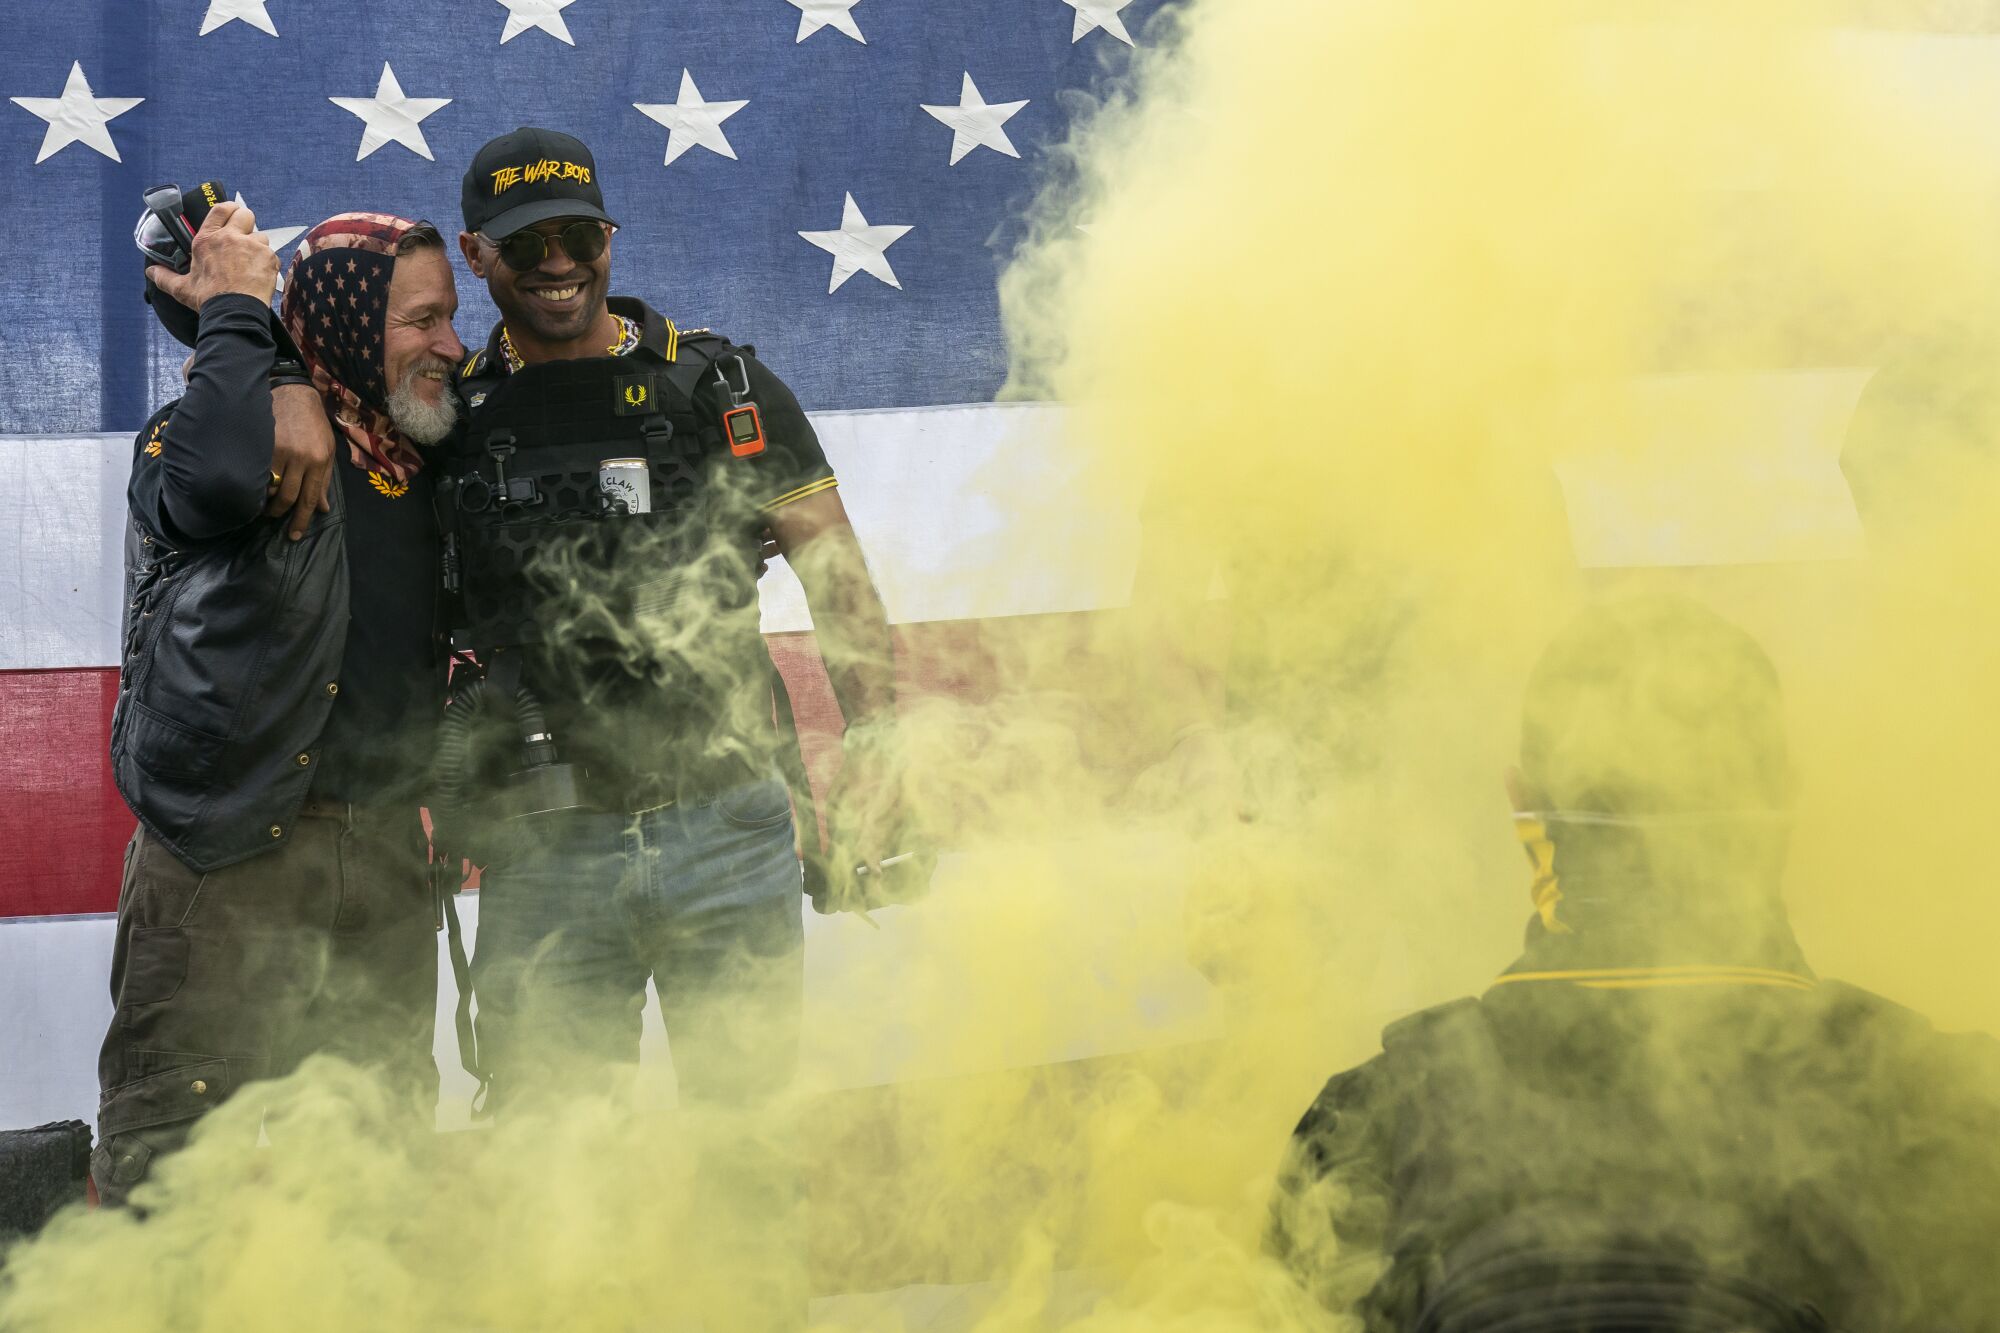 Yellow smoke rises around men in Proud Boys gear in front of a U.S. flag